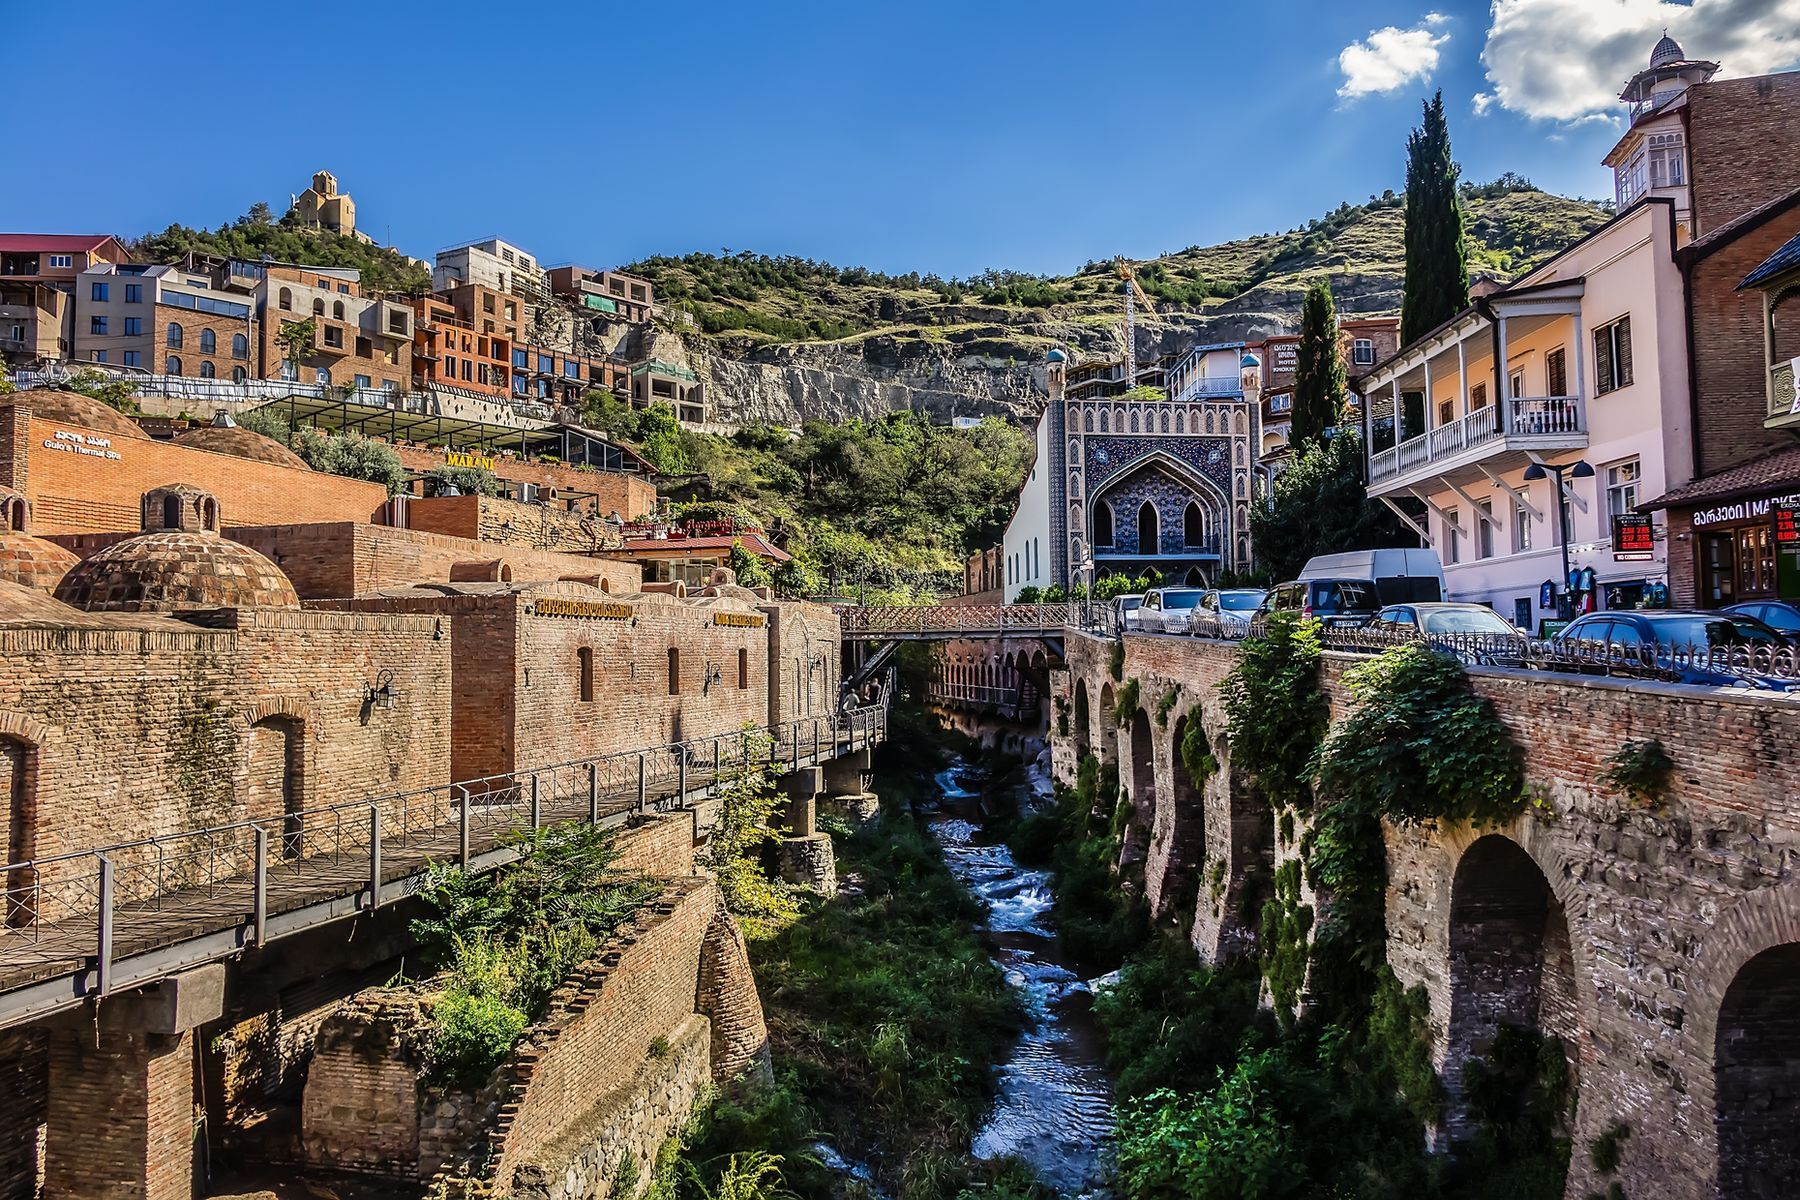 <p>With a cost of living that’s <a href="https://www.numbeo.com/cost-of-living/in/Tbilisi" rel="noreferrer noopener">57% lower than that of France</a>, Georgia is the perfect destination for spendthrift travellers. Indeed, the capital’s <a href="https://tbilisilocalguide.com/public-transport-in-tbilisi/" rel="noreferrer noopener">varied</a> <a href="https://tbilisilocalguide.com/public-transport-in-tbilisi/" rel="noreferrer noopener">and</a> <a href="https://tbilisilocalguide.com/public-transport-in-tbilisi/" rel="noreferrer noopener">inexpensive</a> <a href="https://tbilisilocalguide.com/public-transport-in-tbilisi/" rel="noreferrer noopener">public</a> <a href="https://tbilisilocalguide.com/public-transport-in-tbilisi/" rel="noreferrer noopener">transit</a> <a href="https://tbilisilocalguide.com/public-transport-in-tbilisi/" rel="noreferrer noopener">system</a> makes moving around the city easy. Built around several hot springs, Tbilisi has also developed a reputation for its <a href="https://tbilisilocalguide.com/tbilisi/sulfur-baths/" rel="noreferrer noopener">public sulphur baths</a>. Reserve an individual room, if finances allow, and enjoy a relaxing moment before setting out for Old Tbilisi, a historical district located in the heart of the city. Once there, you’ll find the ruins of <a href="https://wander-lush.org/narikala-fortress-tbilisi-georgia/" rel="noreferrer noopener">Narikala Fortress</a>, a 4th-century citadel. For affordable Georgian cuisine, check out <a href="https://www.facebook.com/ChemoKargoNadzaladevi/" rel="noreferrer noopener">Chemo</a> <a href="https://www.facebook.com/ChemoKargoNadzaladevi/" rel="noreferrer noopener">Kargo</a> at one of the restaurant’s two locations.</p>